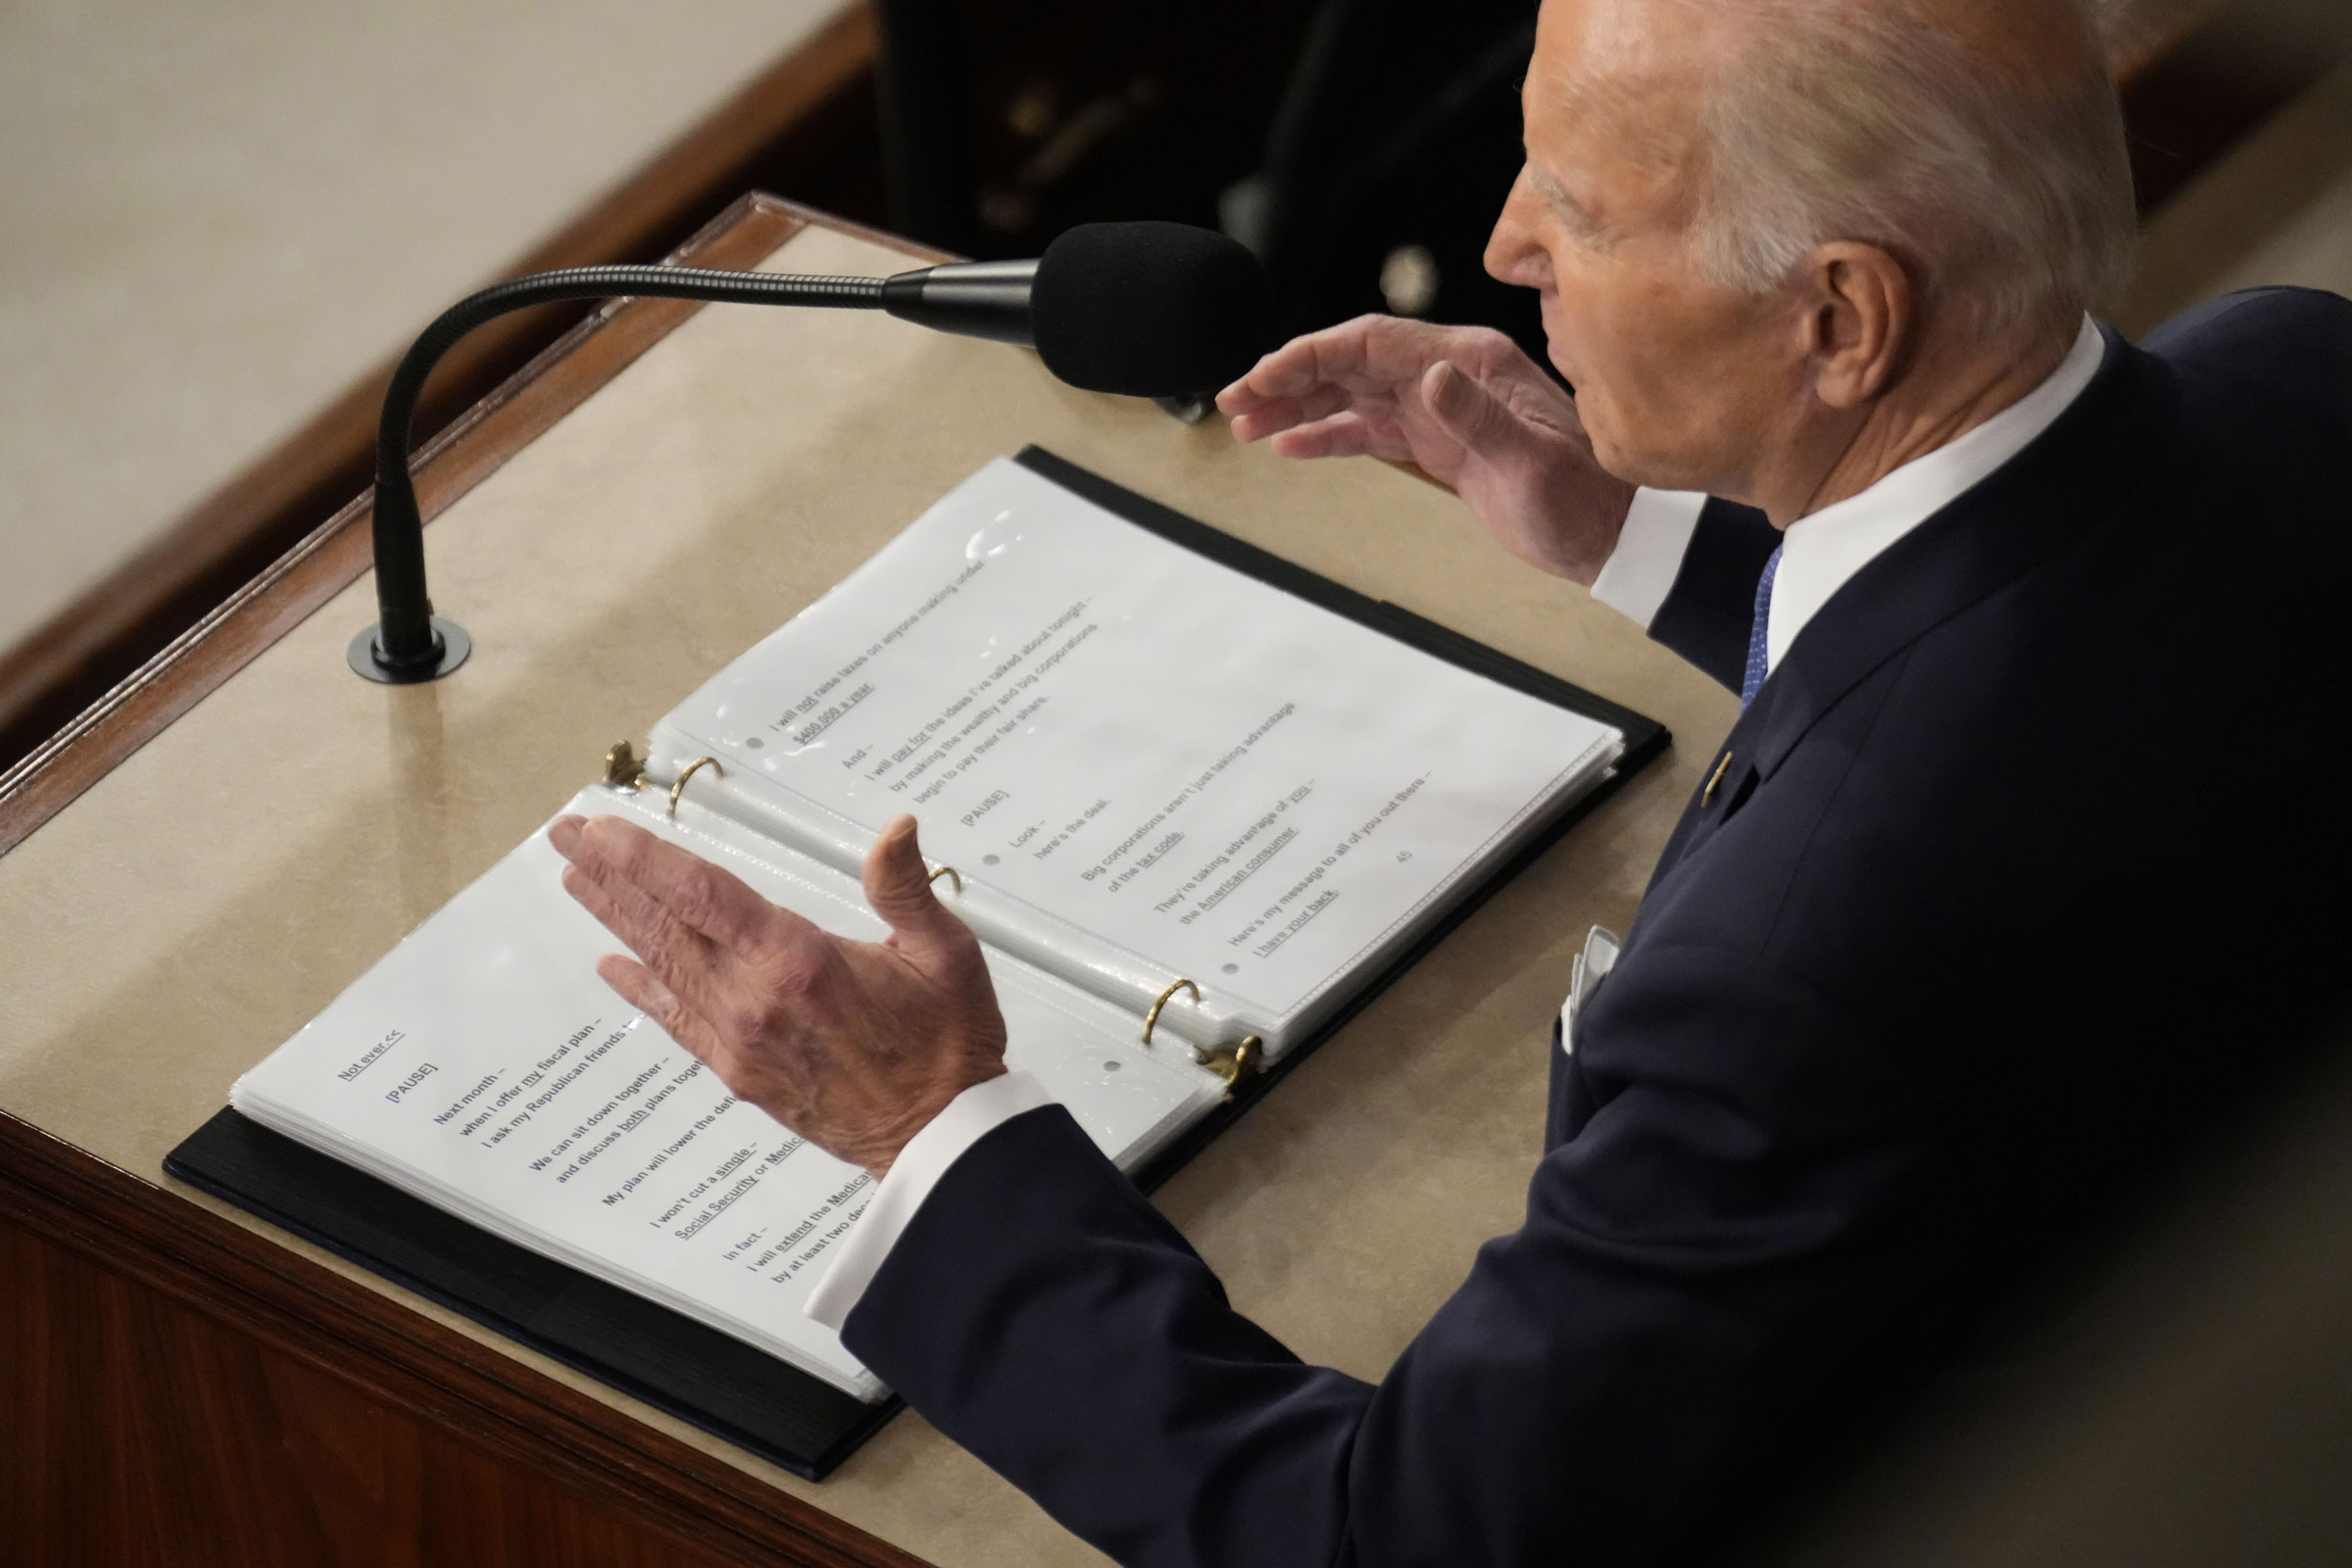 President Joe Biden speaks during a State of the Union address at the U.S. Capitol on Feb. 7, 2023.